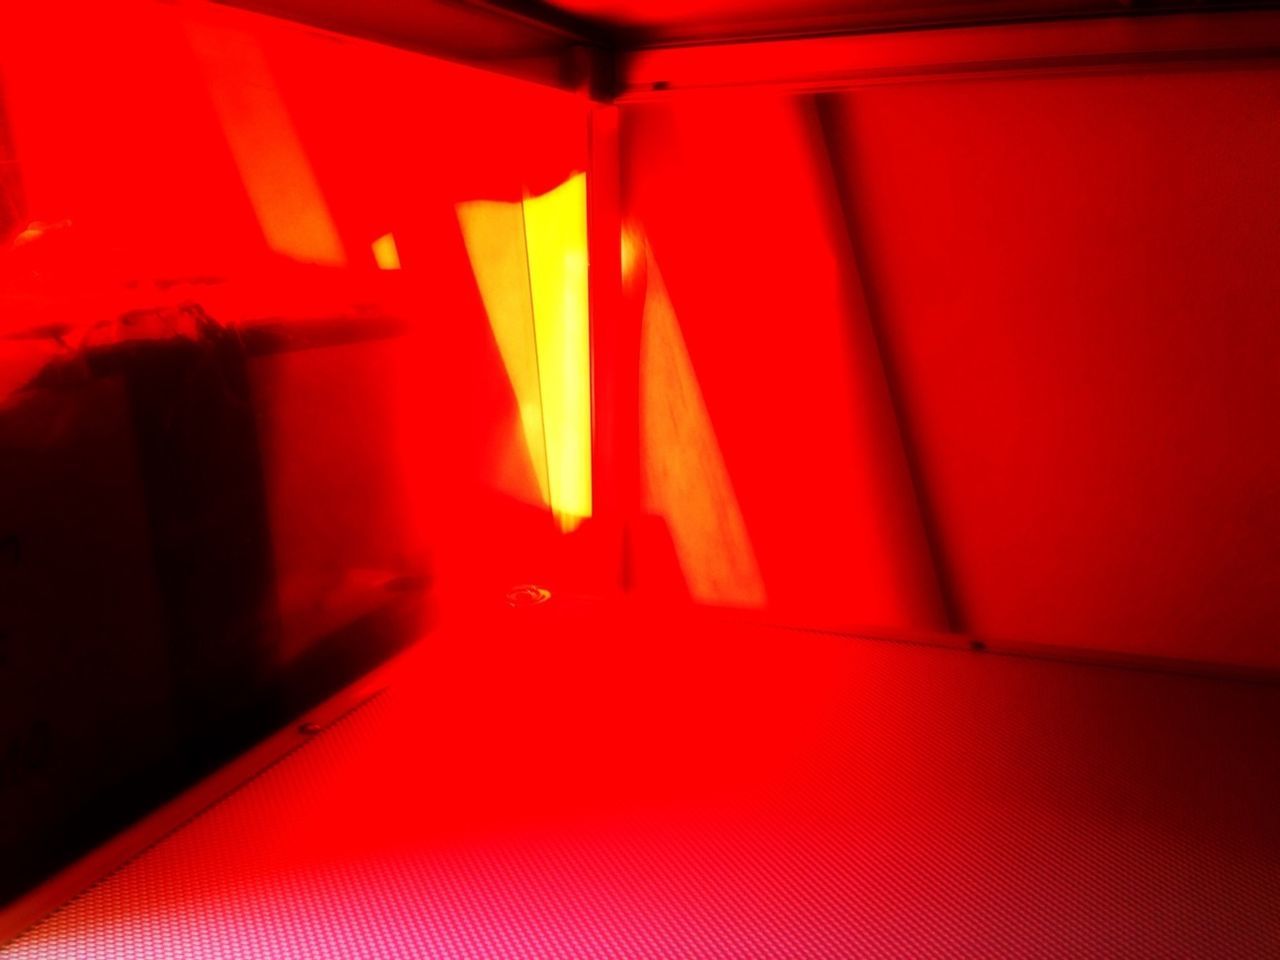 indoors, red, absence, empty, chair, window, seat, home interior, no people, illuminated, sunlight, curtain, in a row, orange color, vehicle seat, flooring, interior, close-up, door, reflection